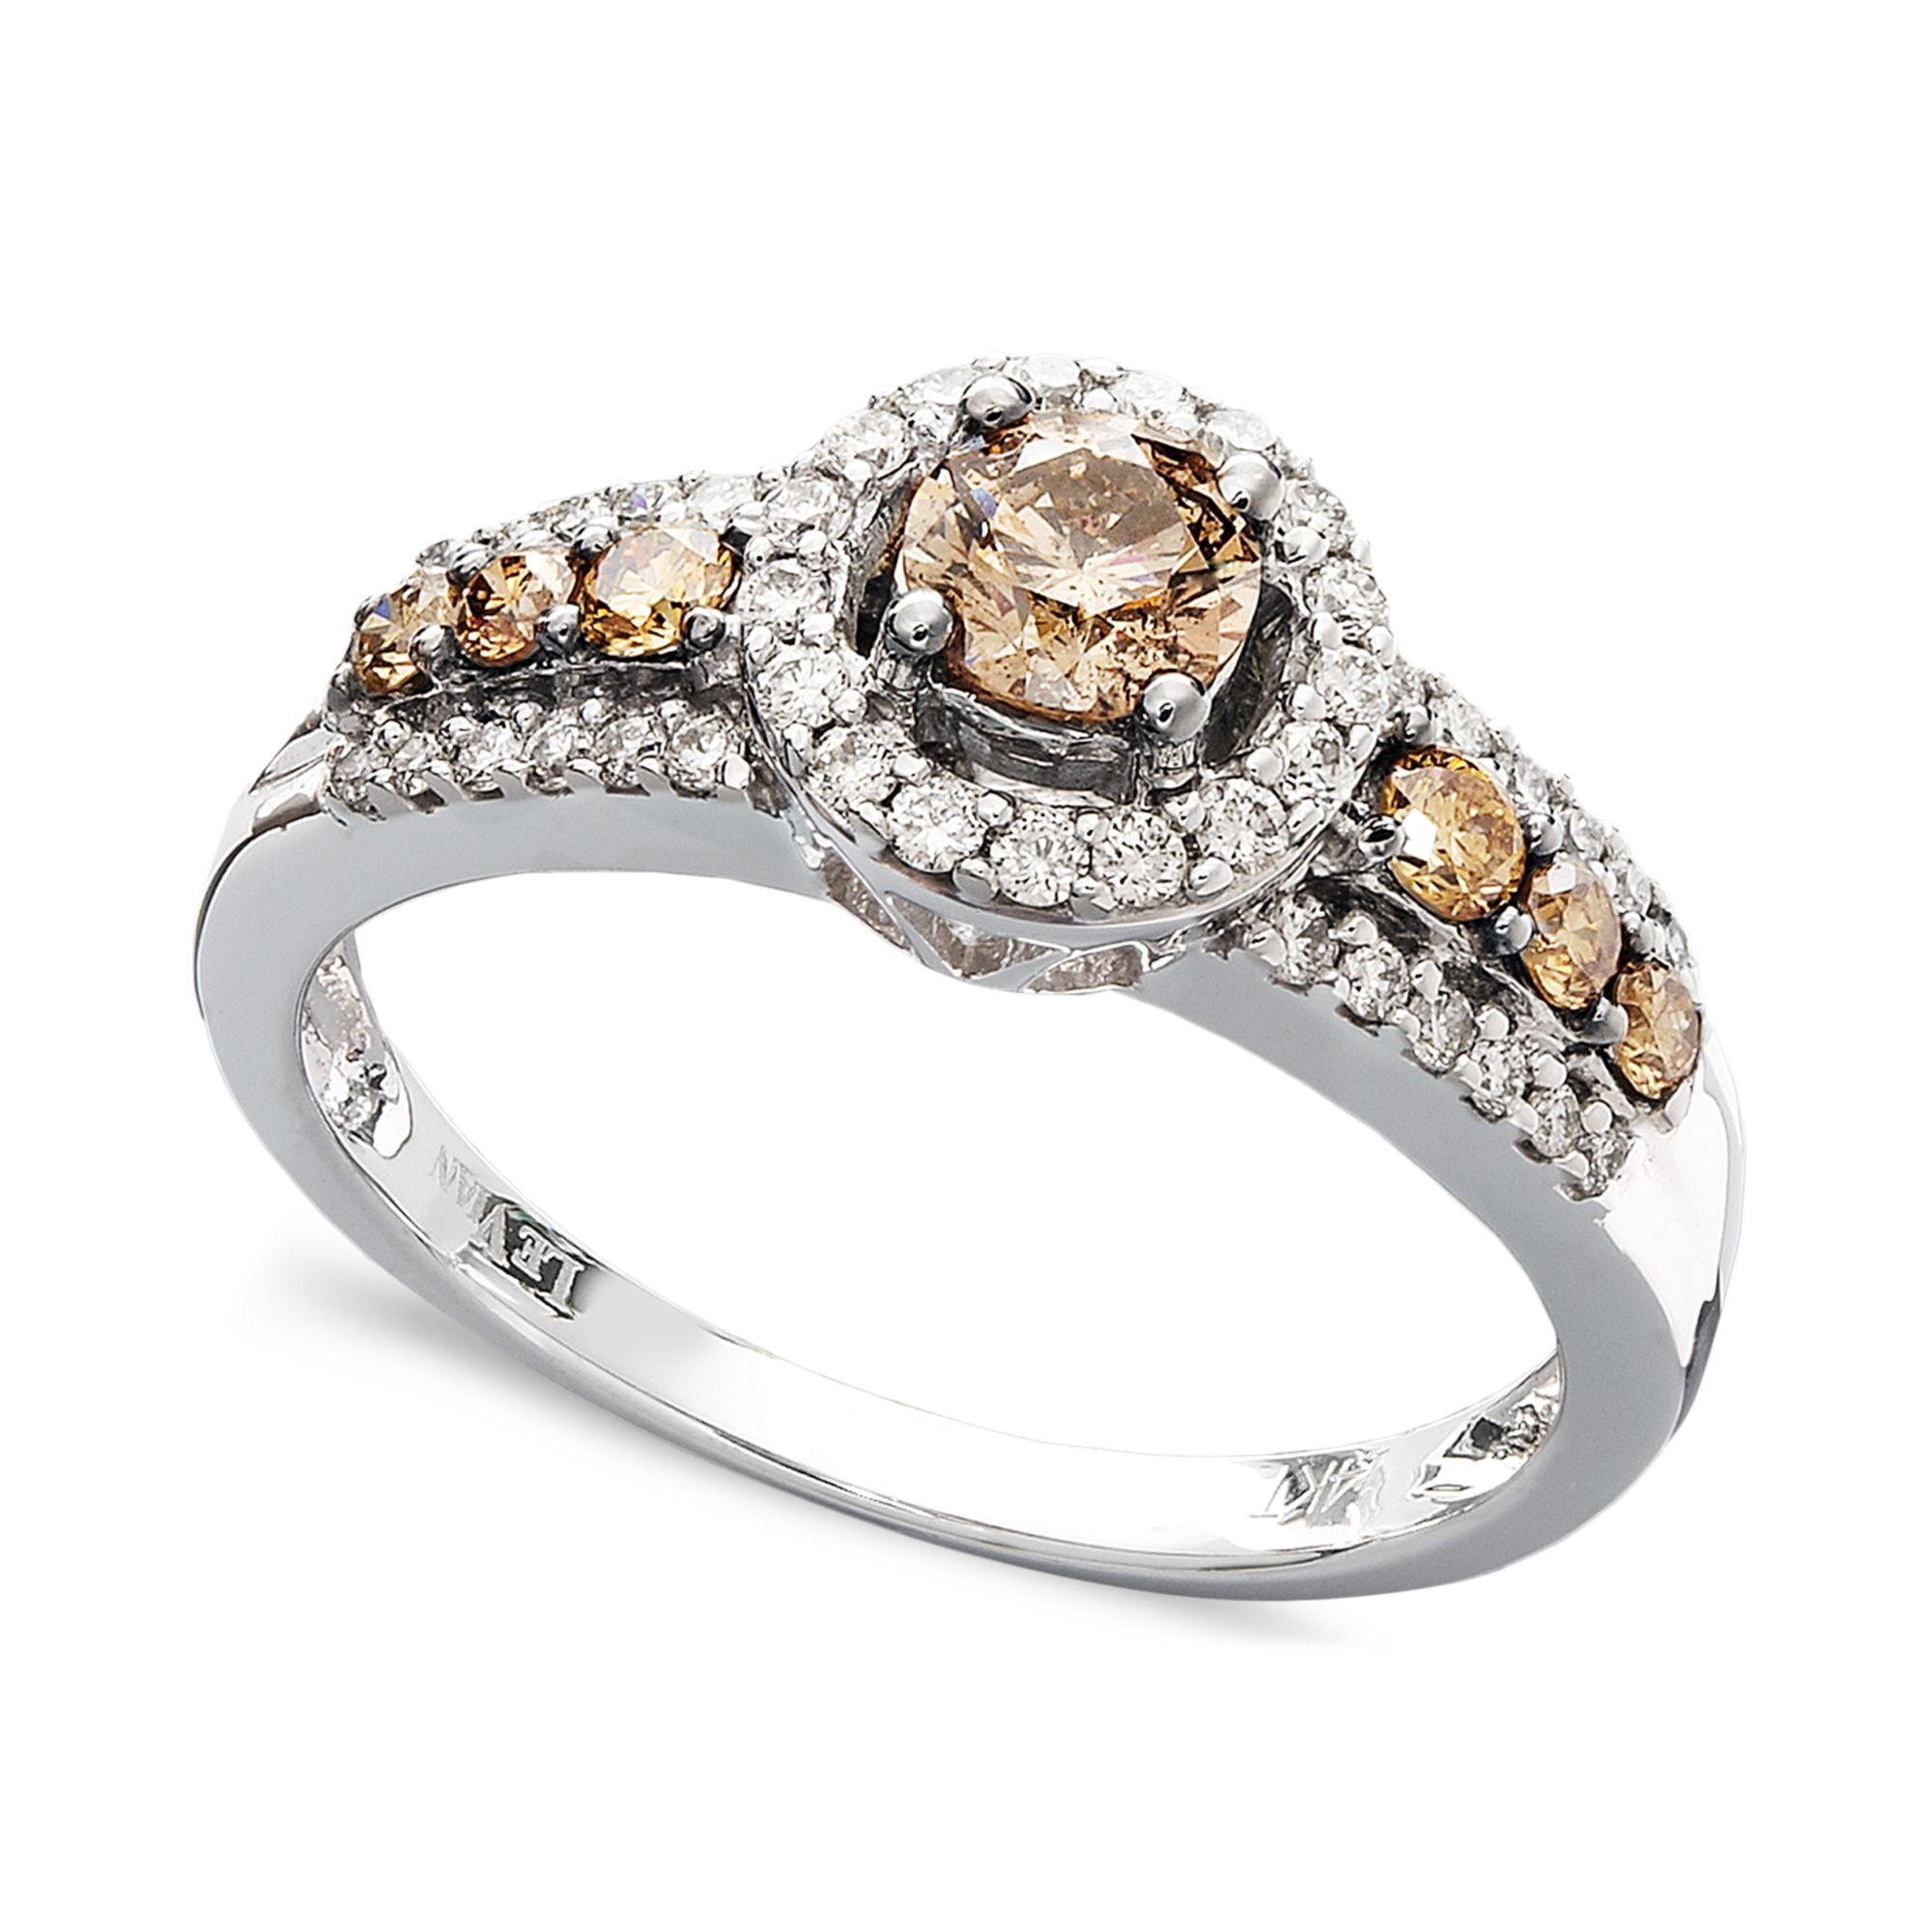 Levian Chocolate Diamond Rings
 Le vian Chocolate And White Diamond Ring In 14k White Gold